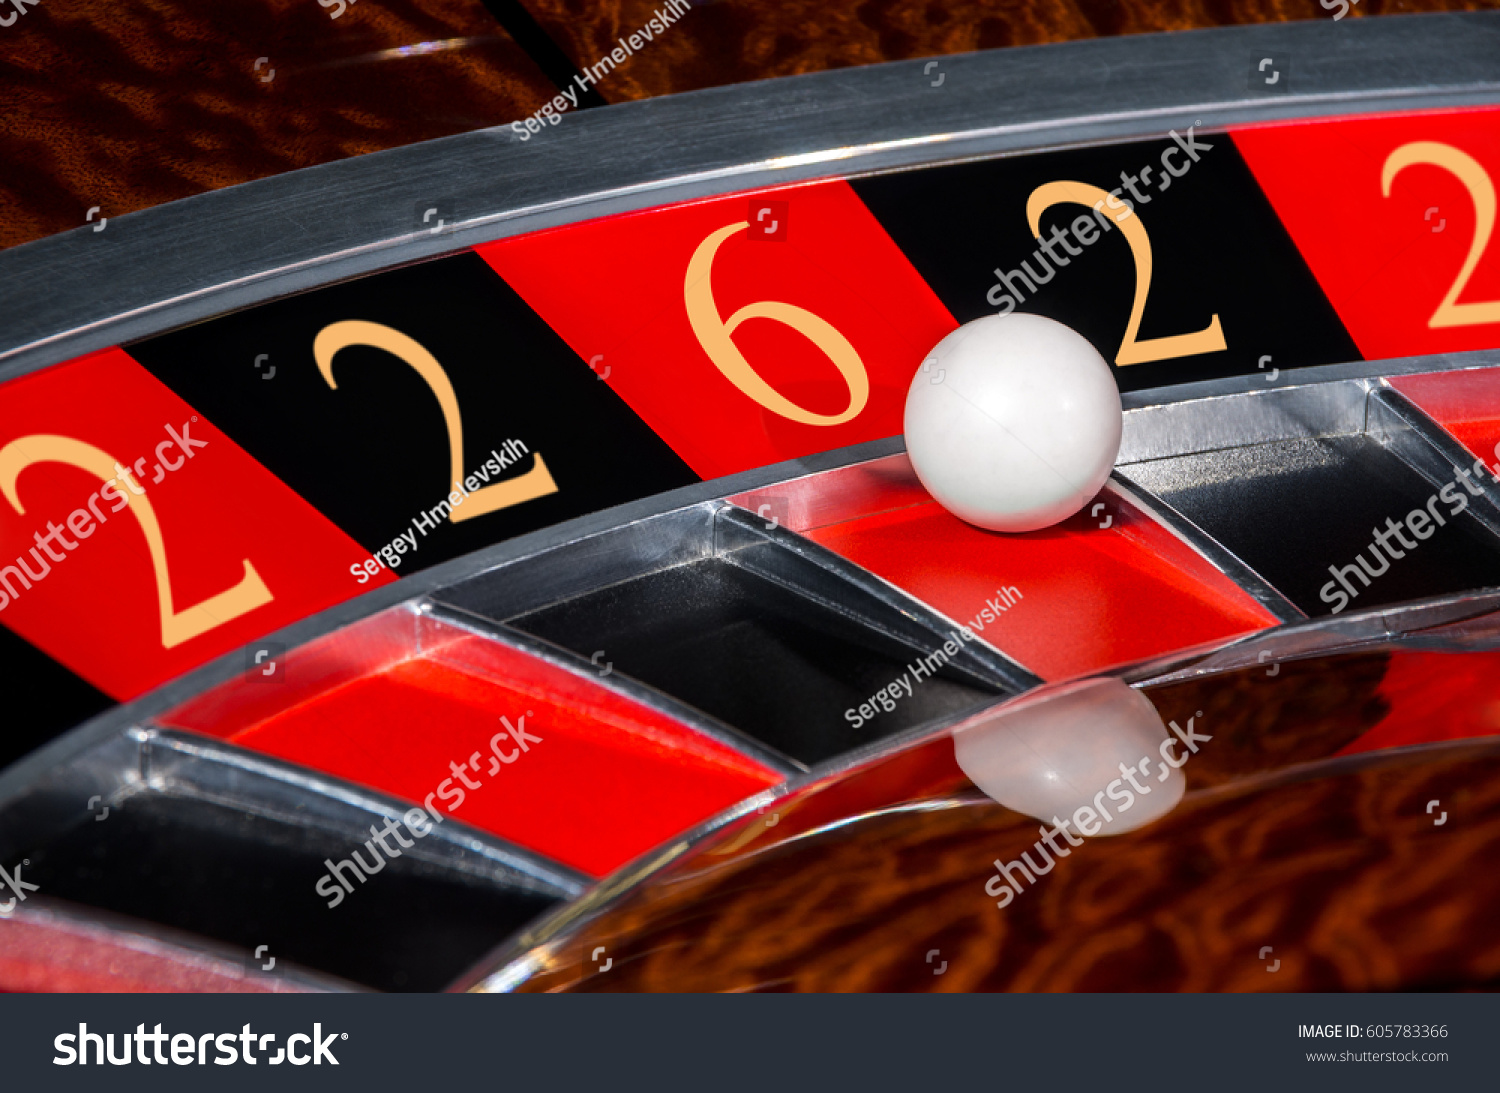 Concept of classic casino code 2-2-6-2-2 lucky numbers roulette wheel with black and red sectors and white ball #605783366